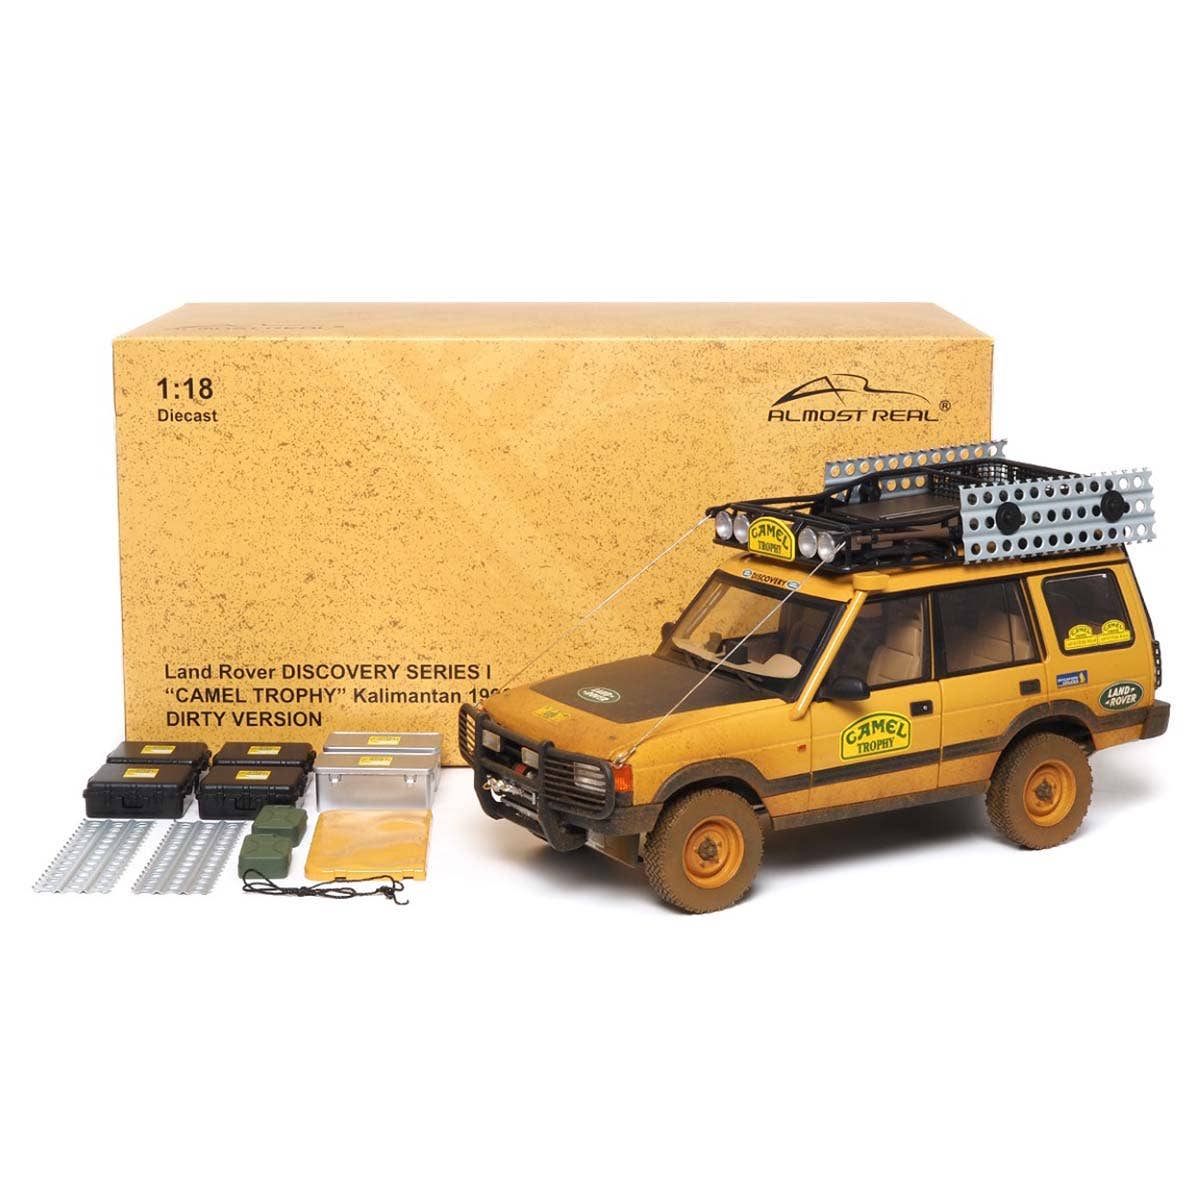 LAND ROVER DISCOVERY SERIES I - 5-DOOR - 'CAMEL TROPHY' KALIMANTAN 1996 - DIRTY VERSION - 1:18 Scale Diecast Model Car